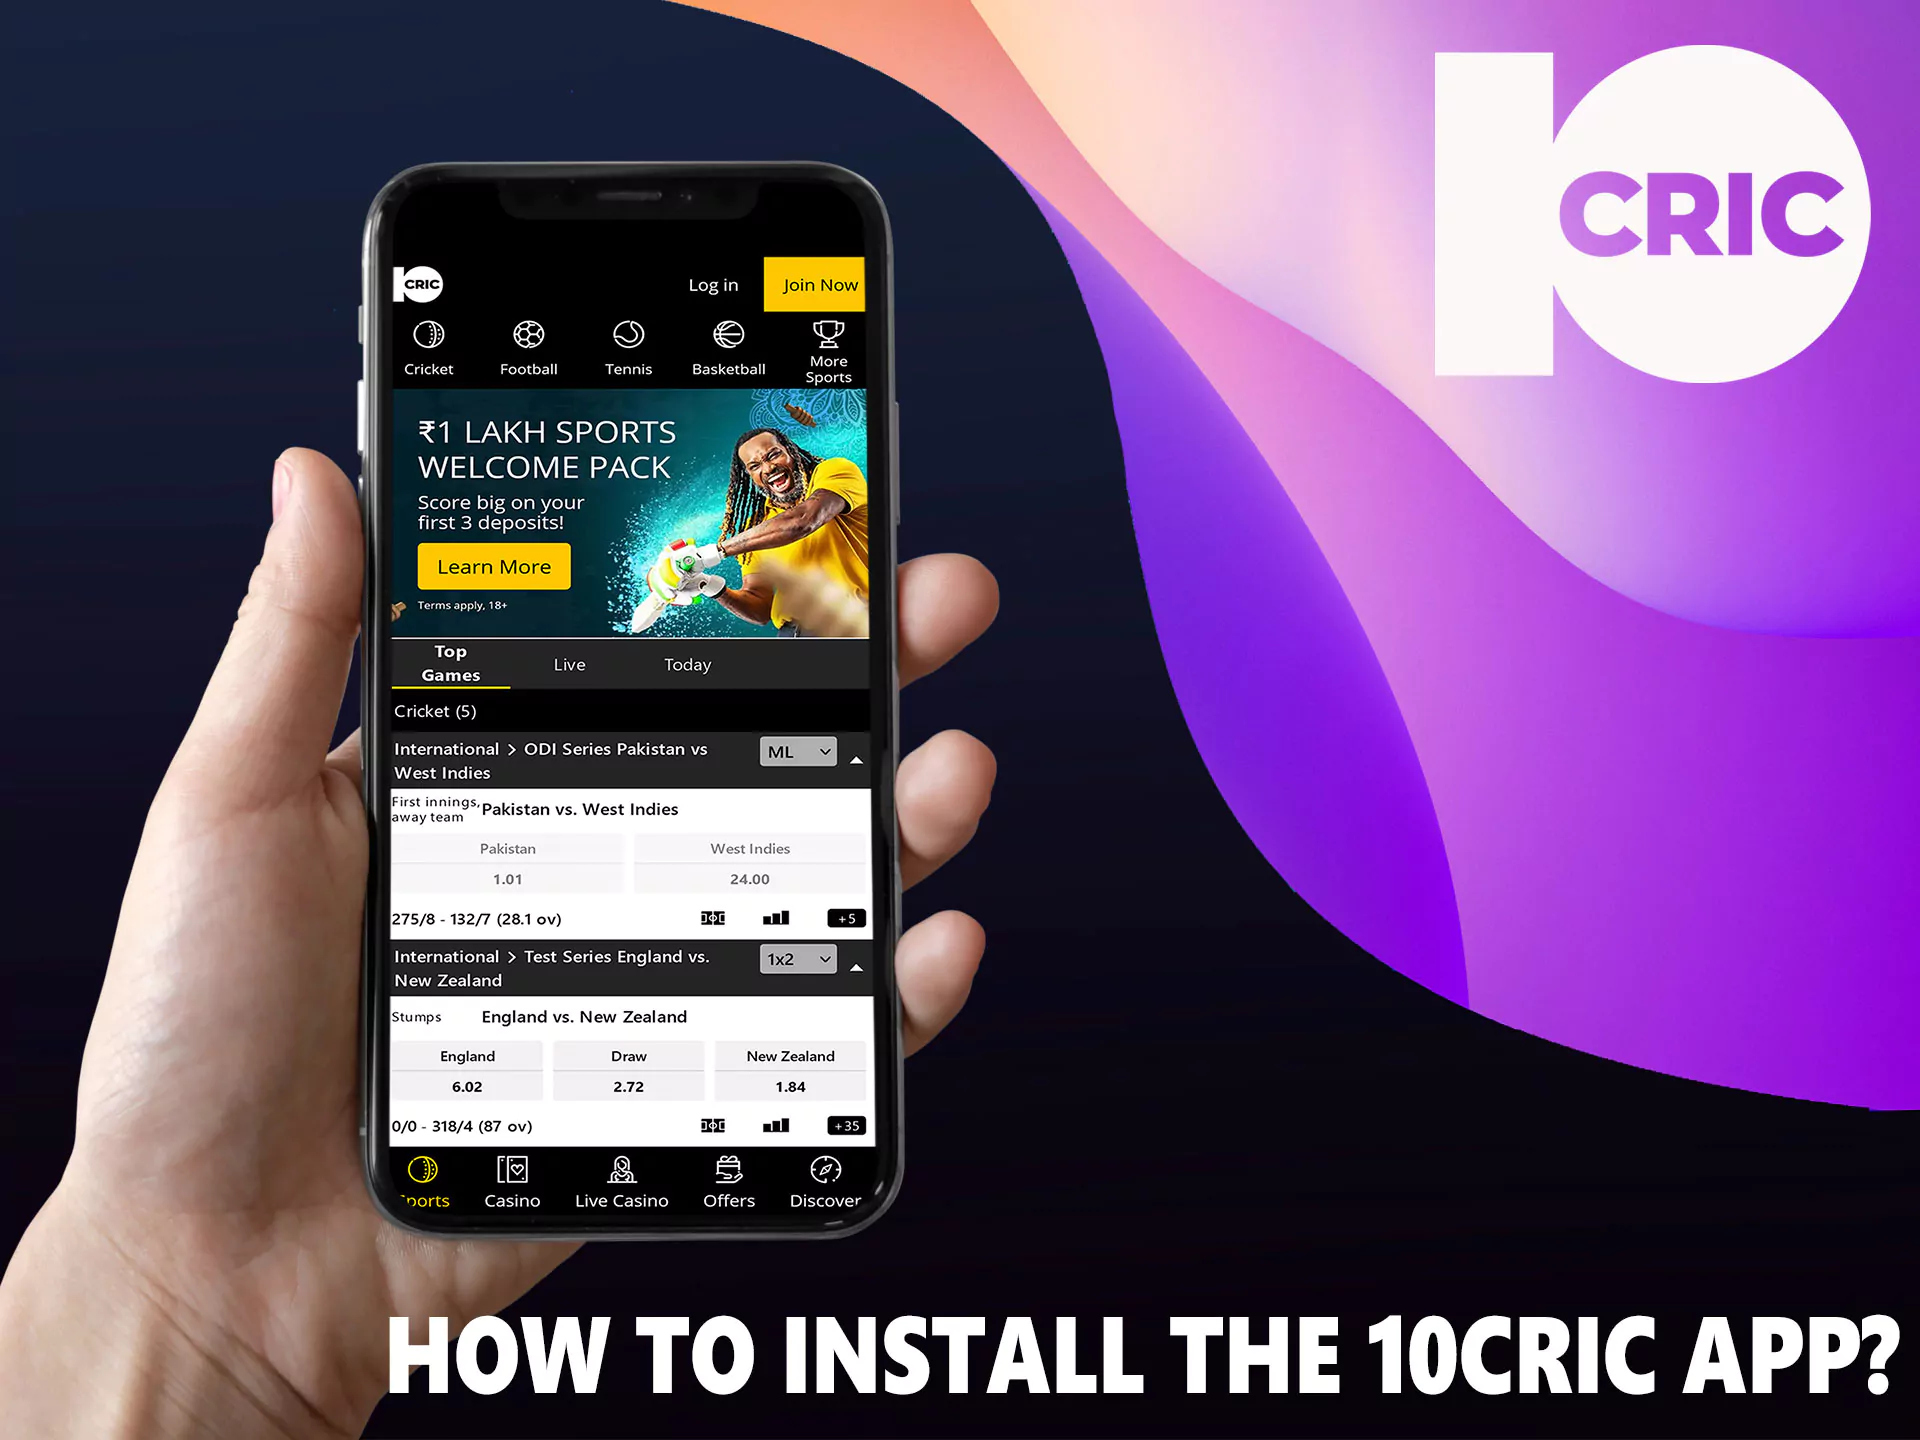 To get on your IOS or Android device, follow these simple steps, which are given in our article.